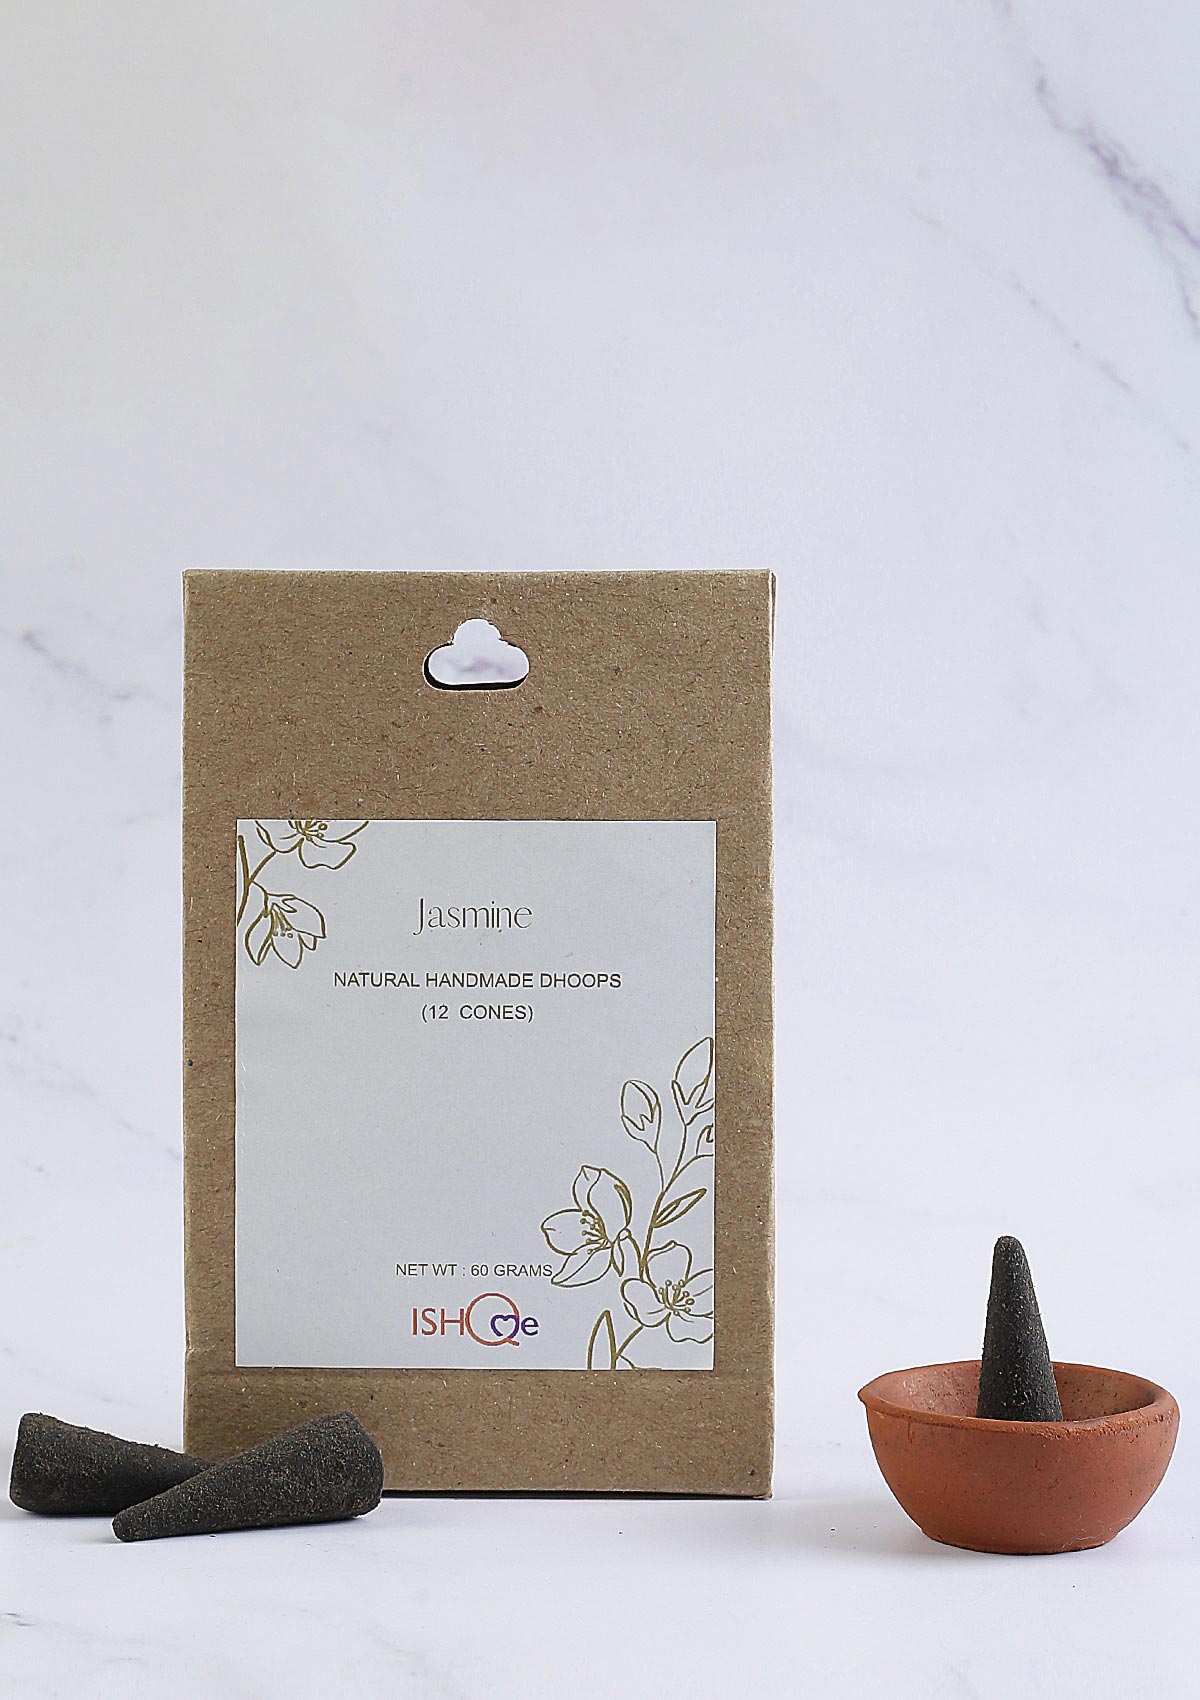 Floral and Earthy Elegance: IshqMe's Rose, Jasmine, and Musk Incense Cones - IshqMe